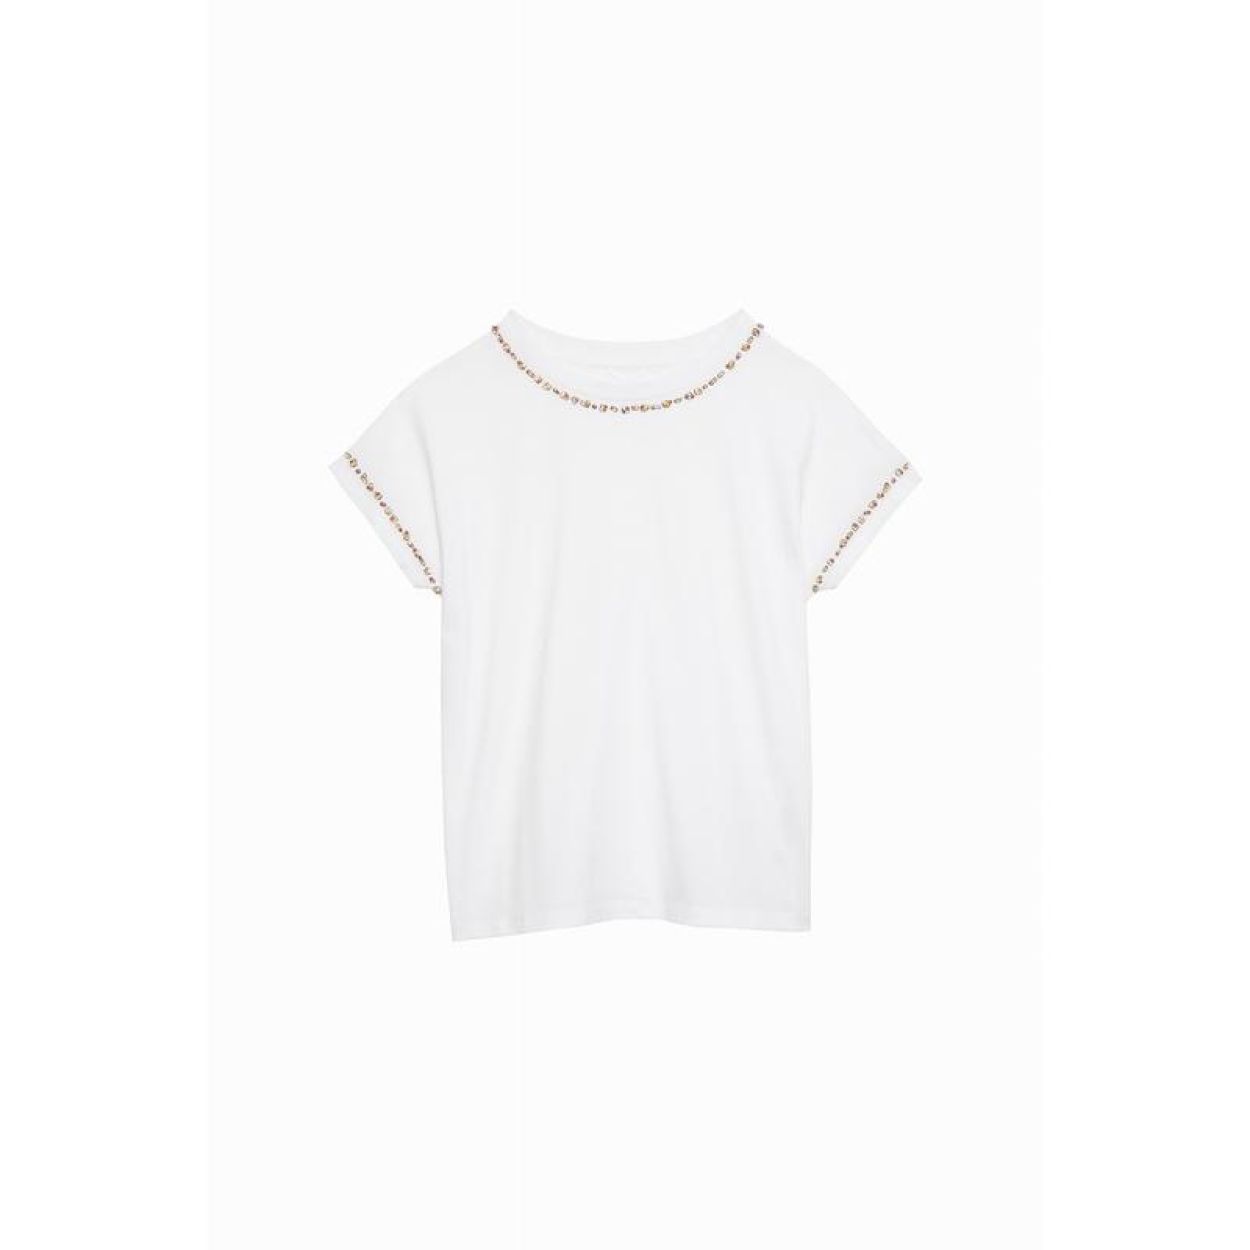 Max & Moi T-shirt Wit  (Woomera/white) - Corylie (Roeselare)